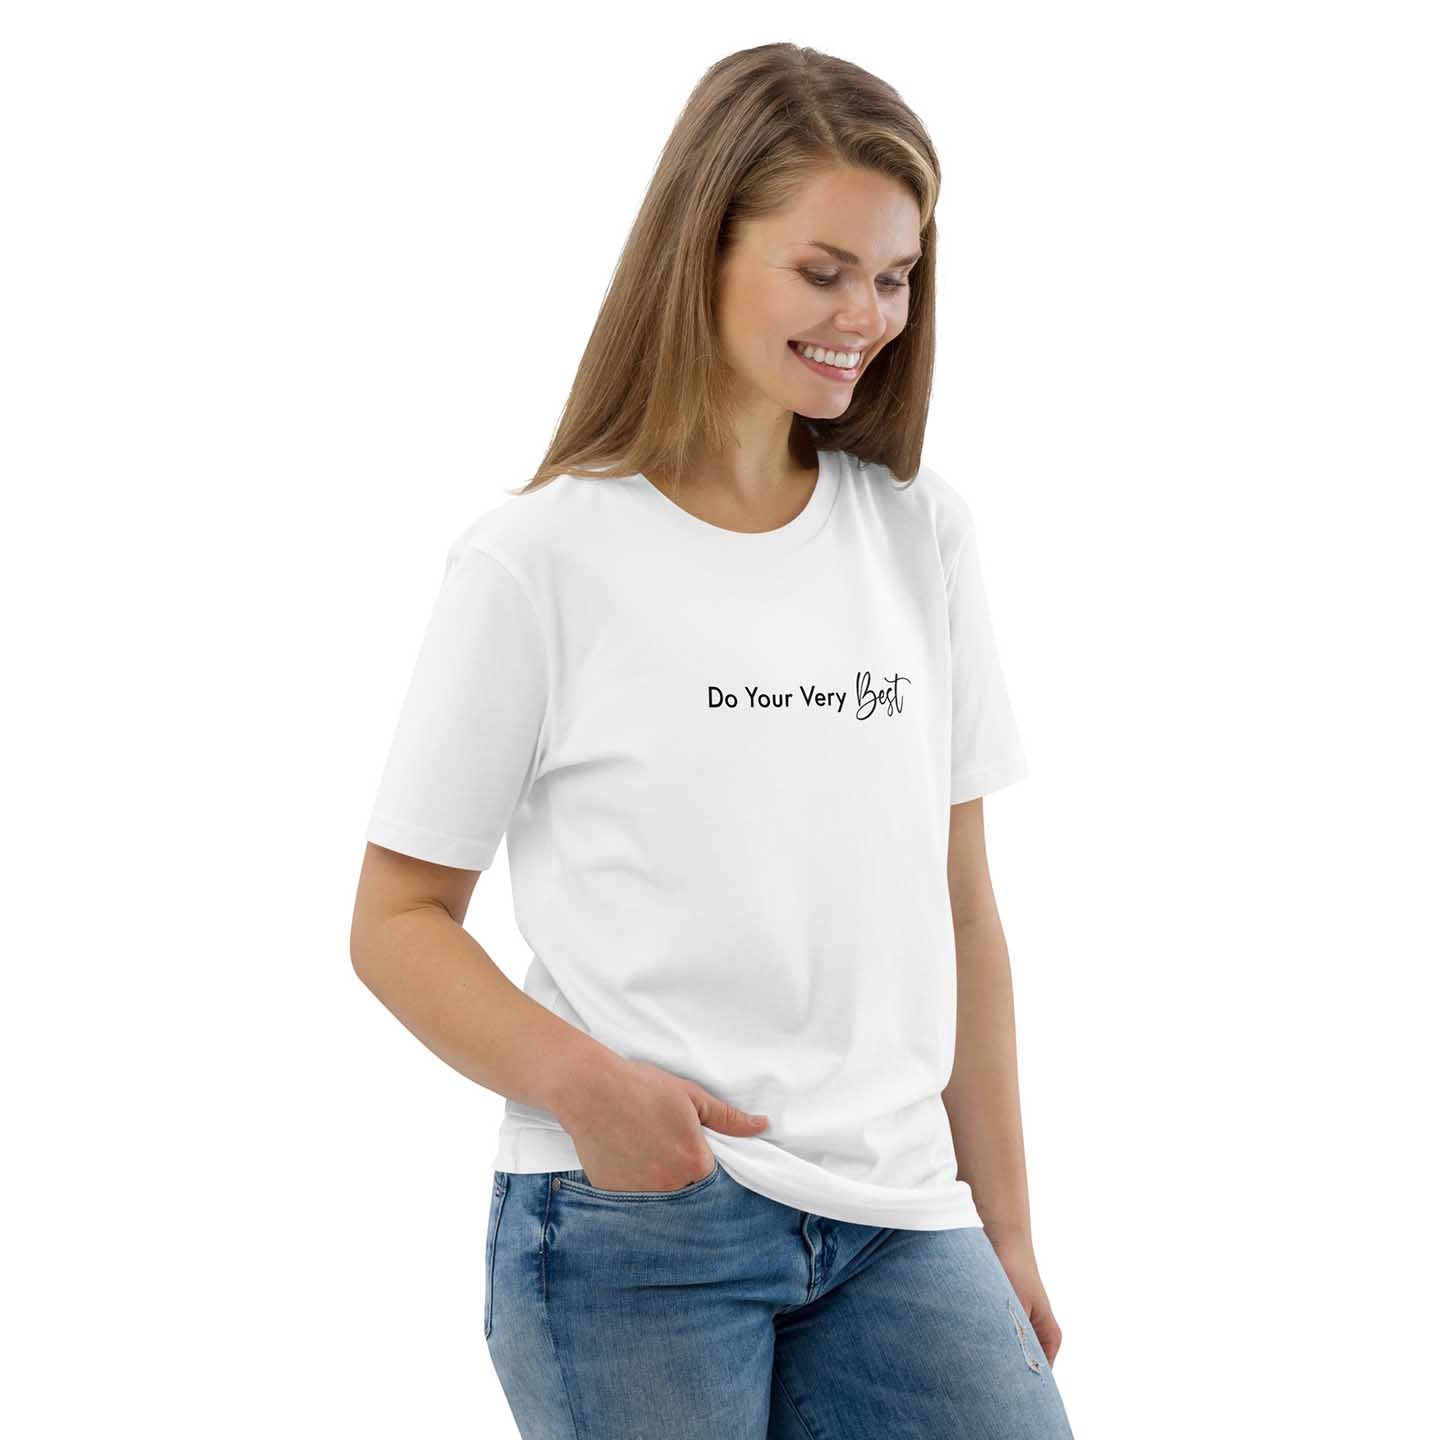 Women black inspirational t-shirt with motivational quote, "Do Your Very Best."